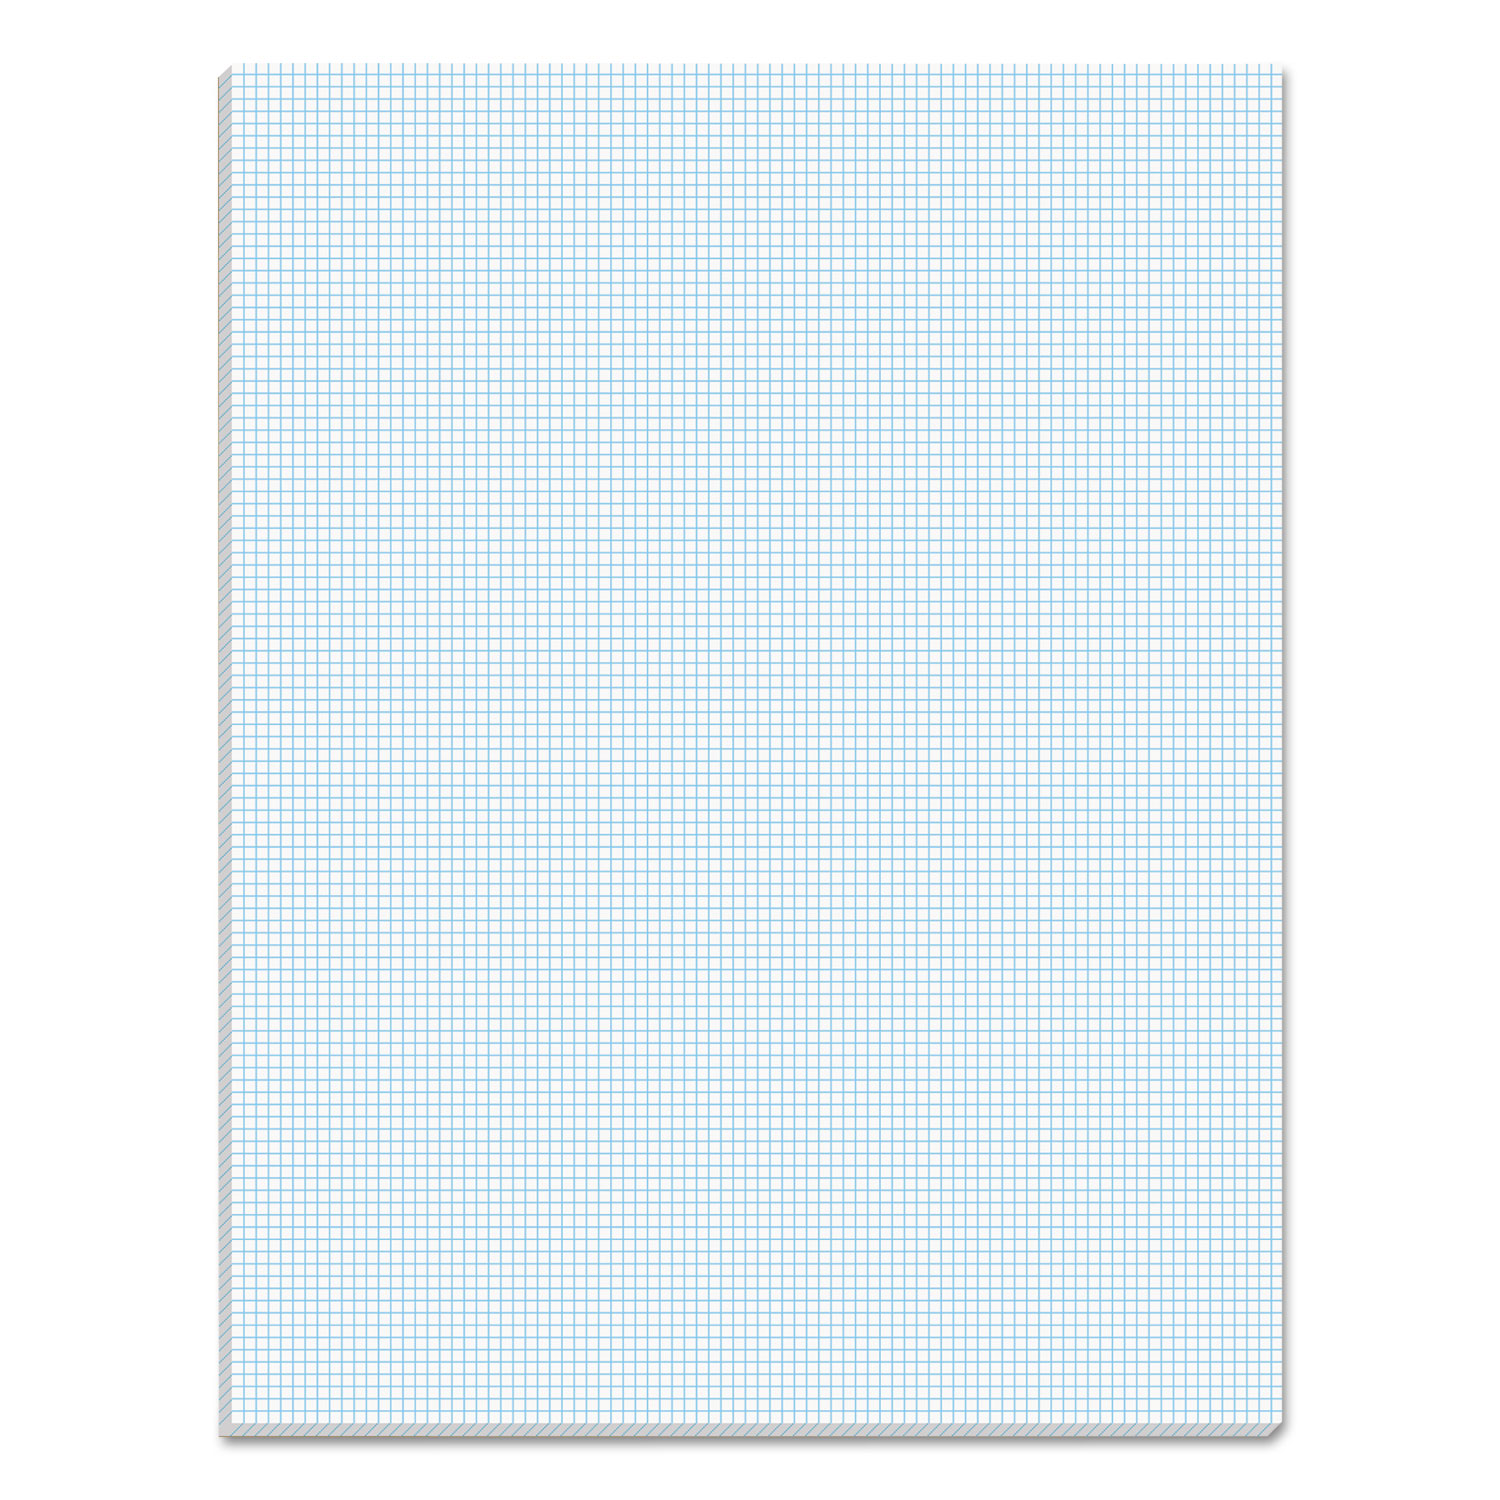  TOPS 33101 Quadrille Pads, 10 sq/in Quadrille Rule, 8.5 x 11, White, 50 Sheets (TOP33101) 